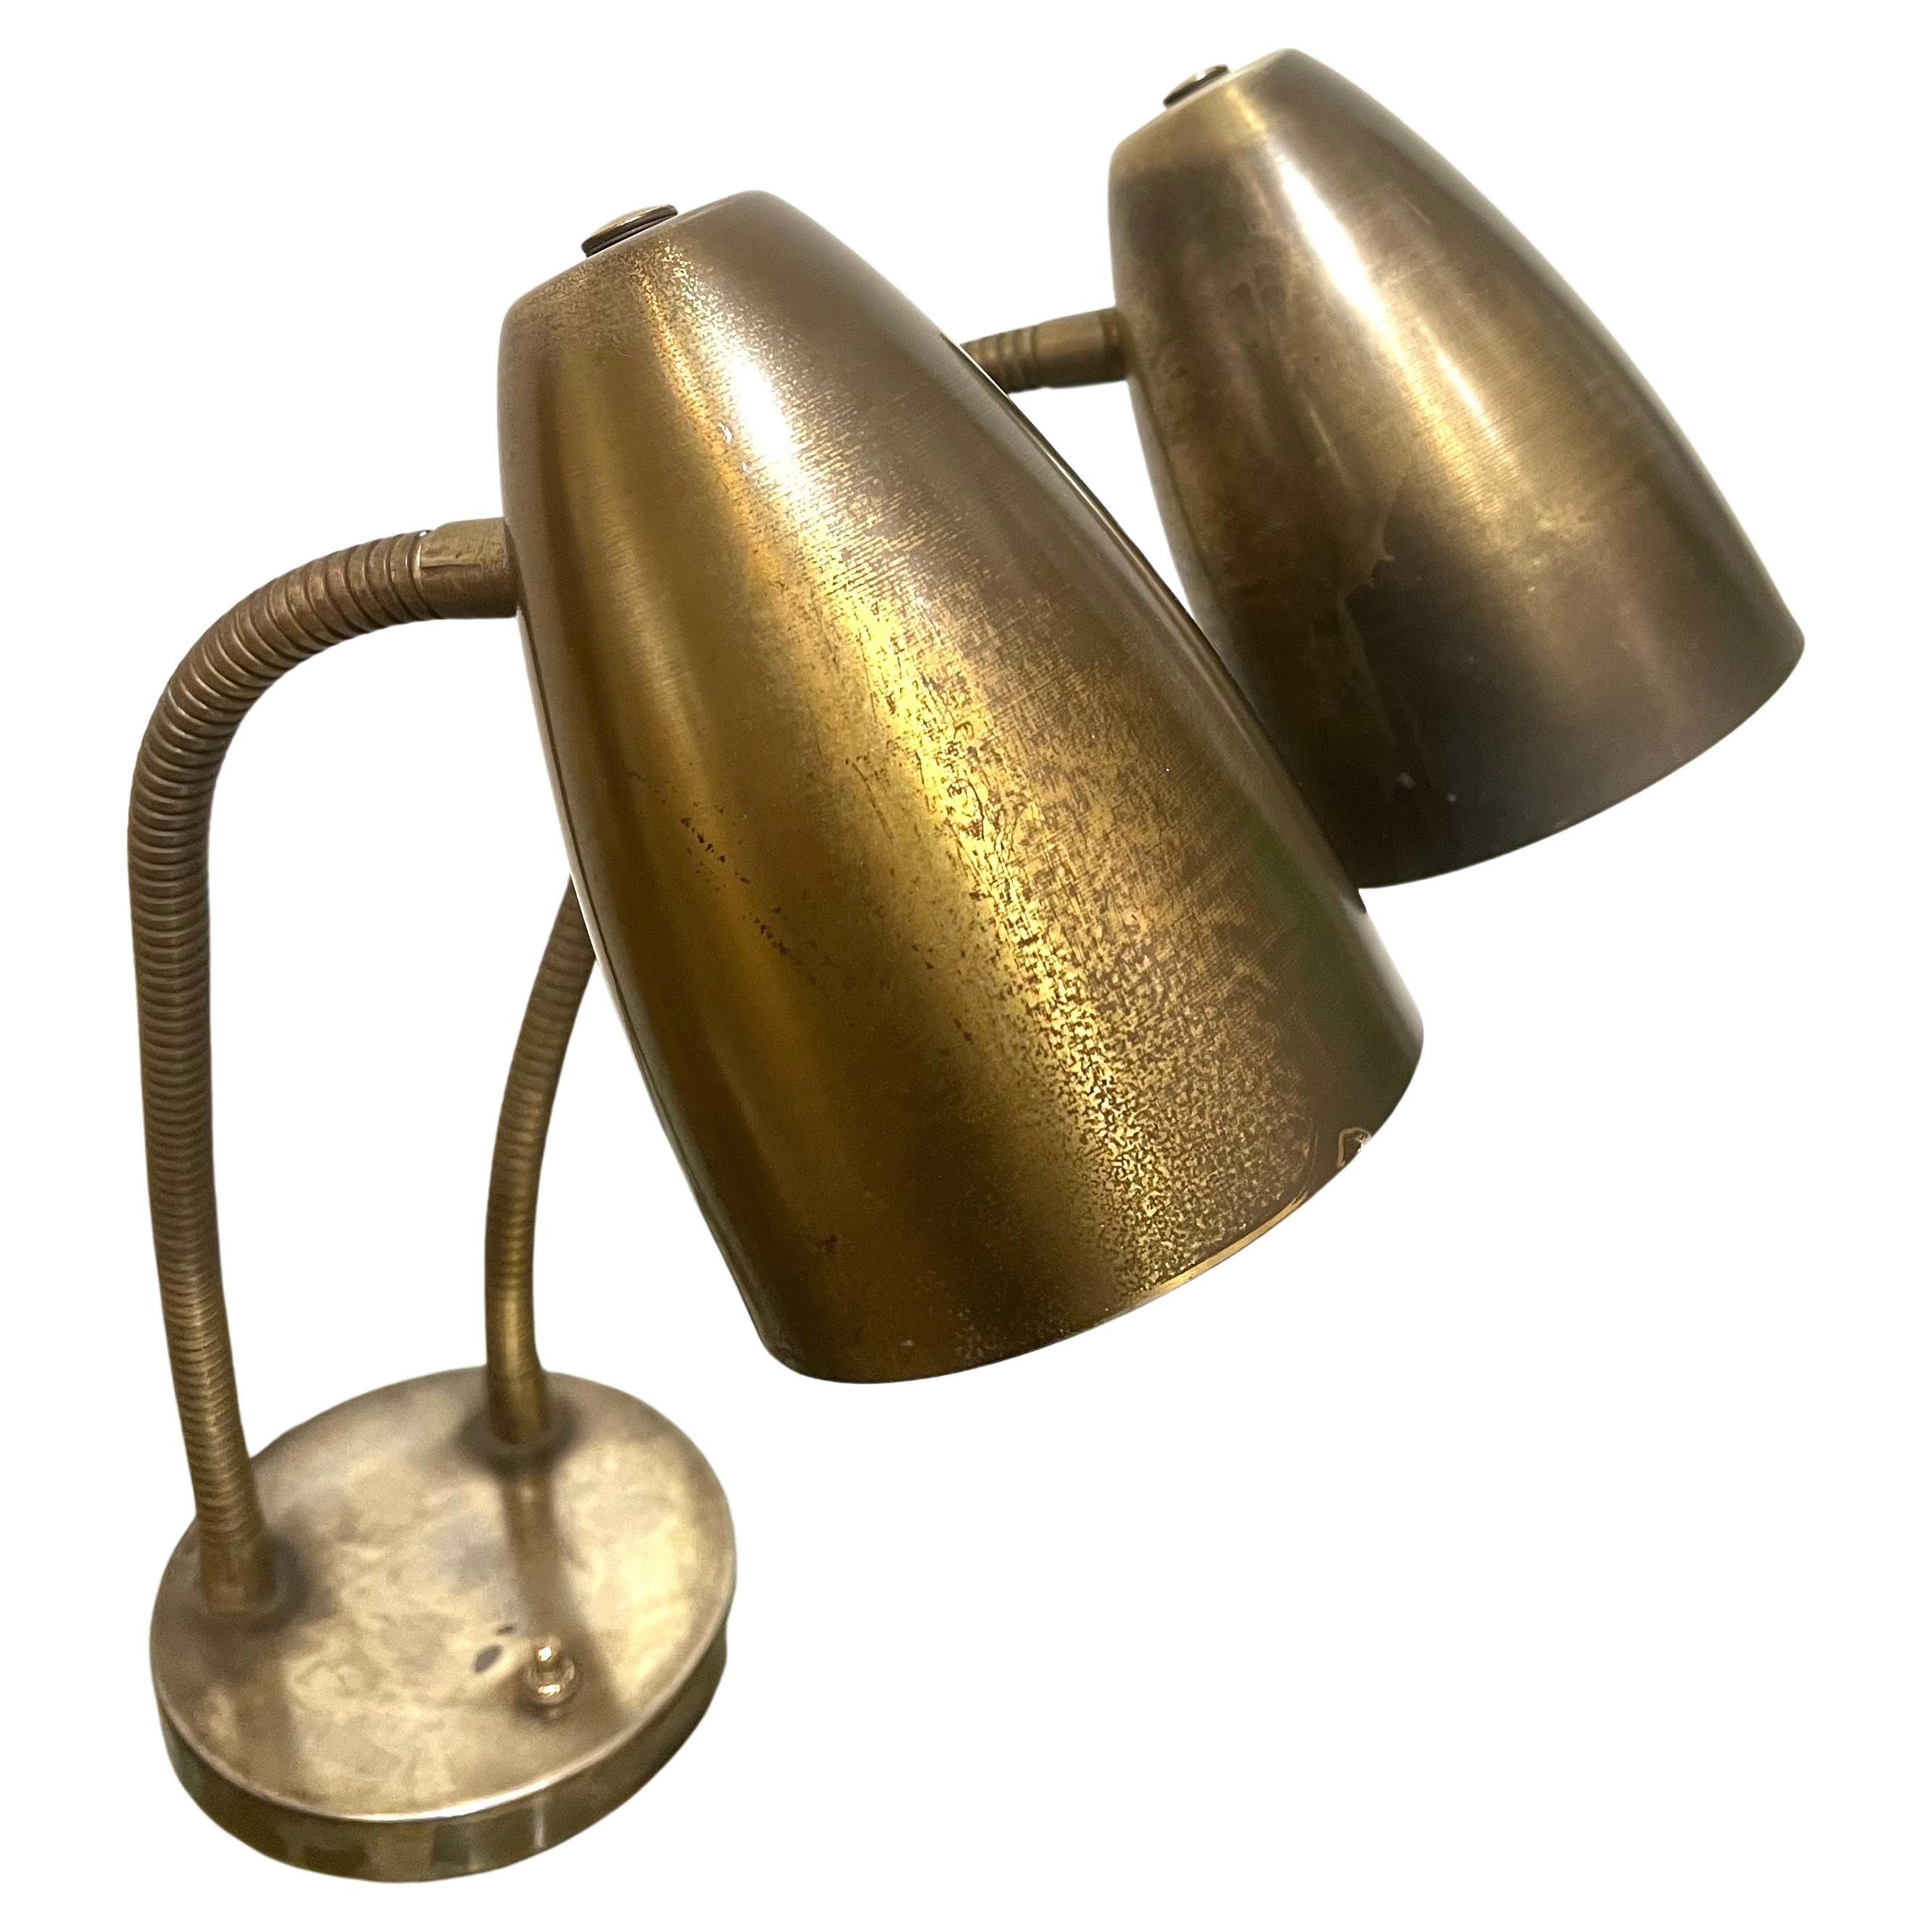 Double head patinated brass finish gooseneck table/desk lamp, circa 1950s great condition very clean condition original finish can be polished 3-way perfect working condition.